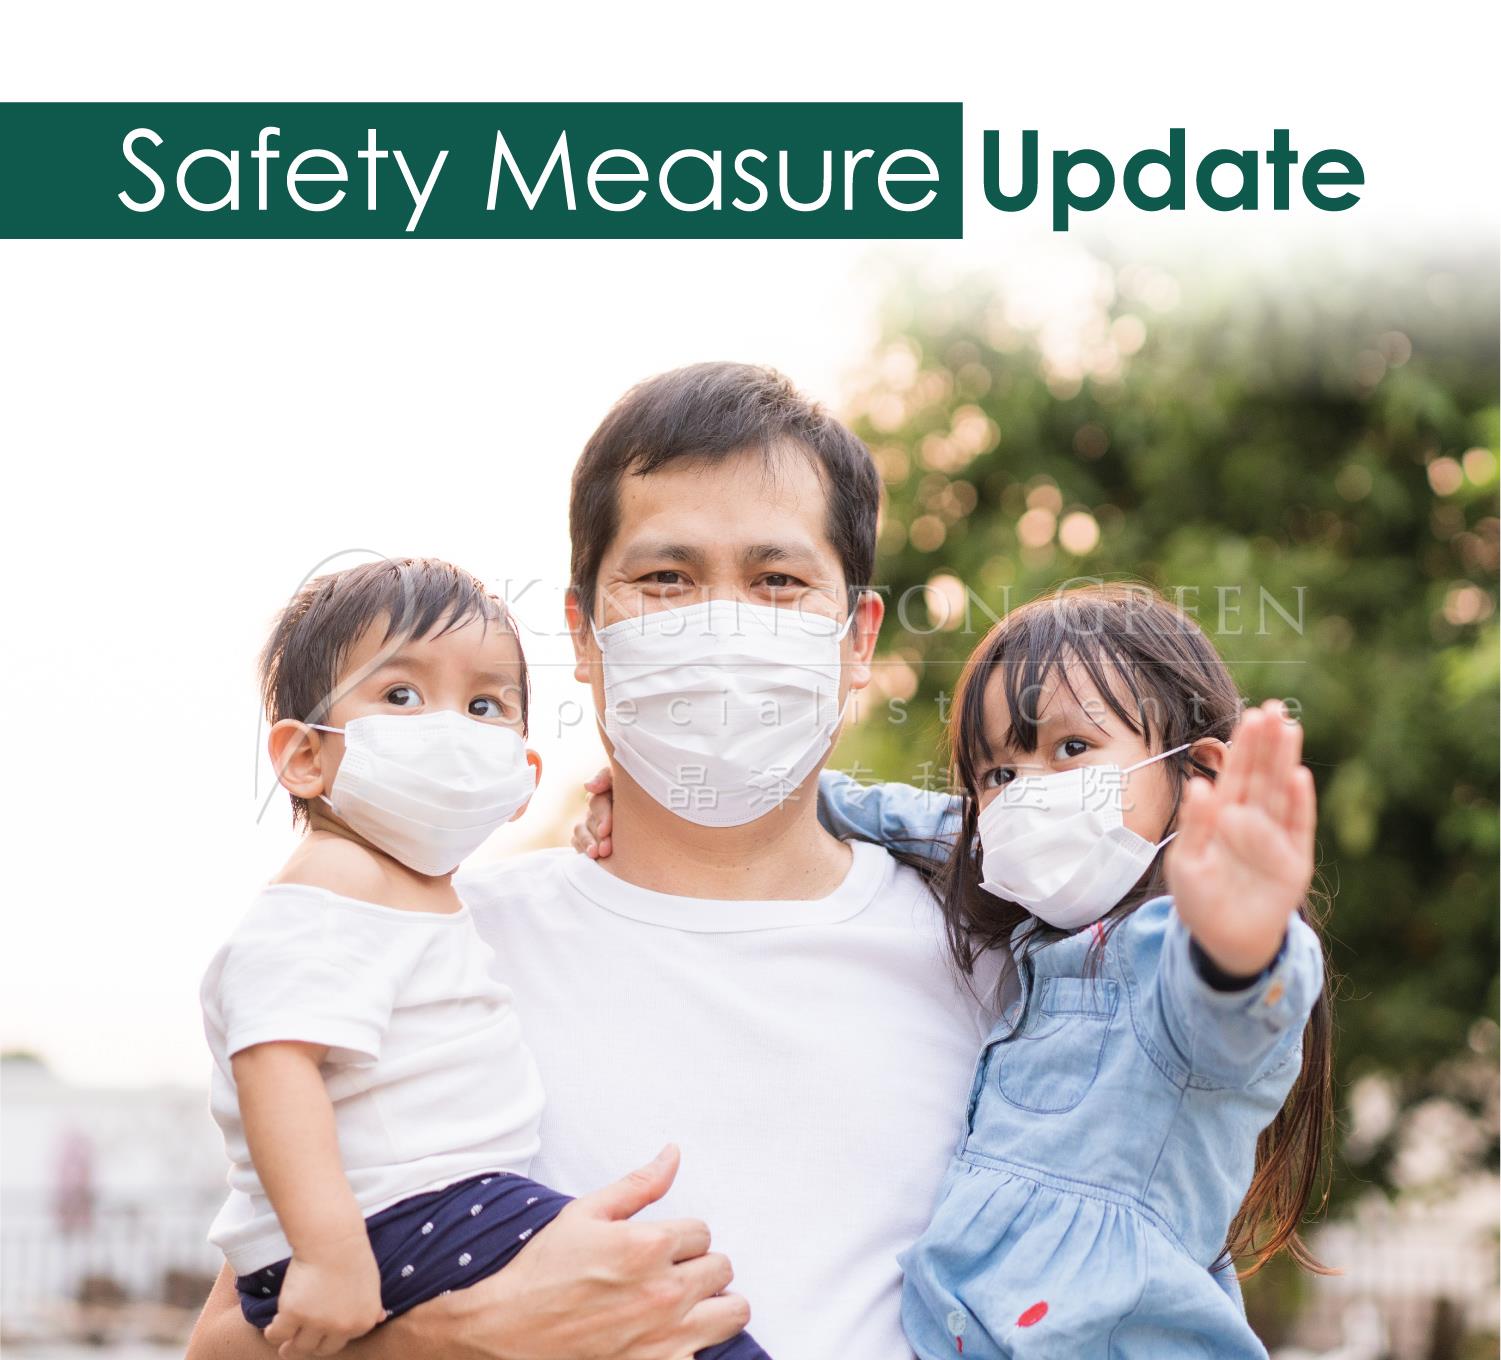 Safety Measure Update